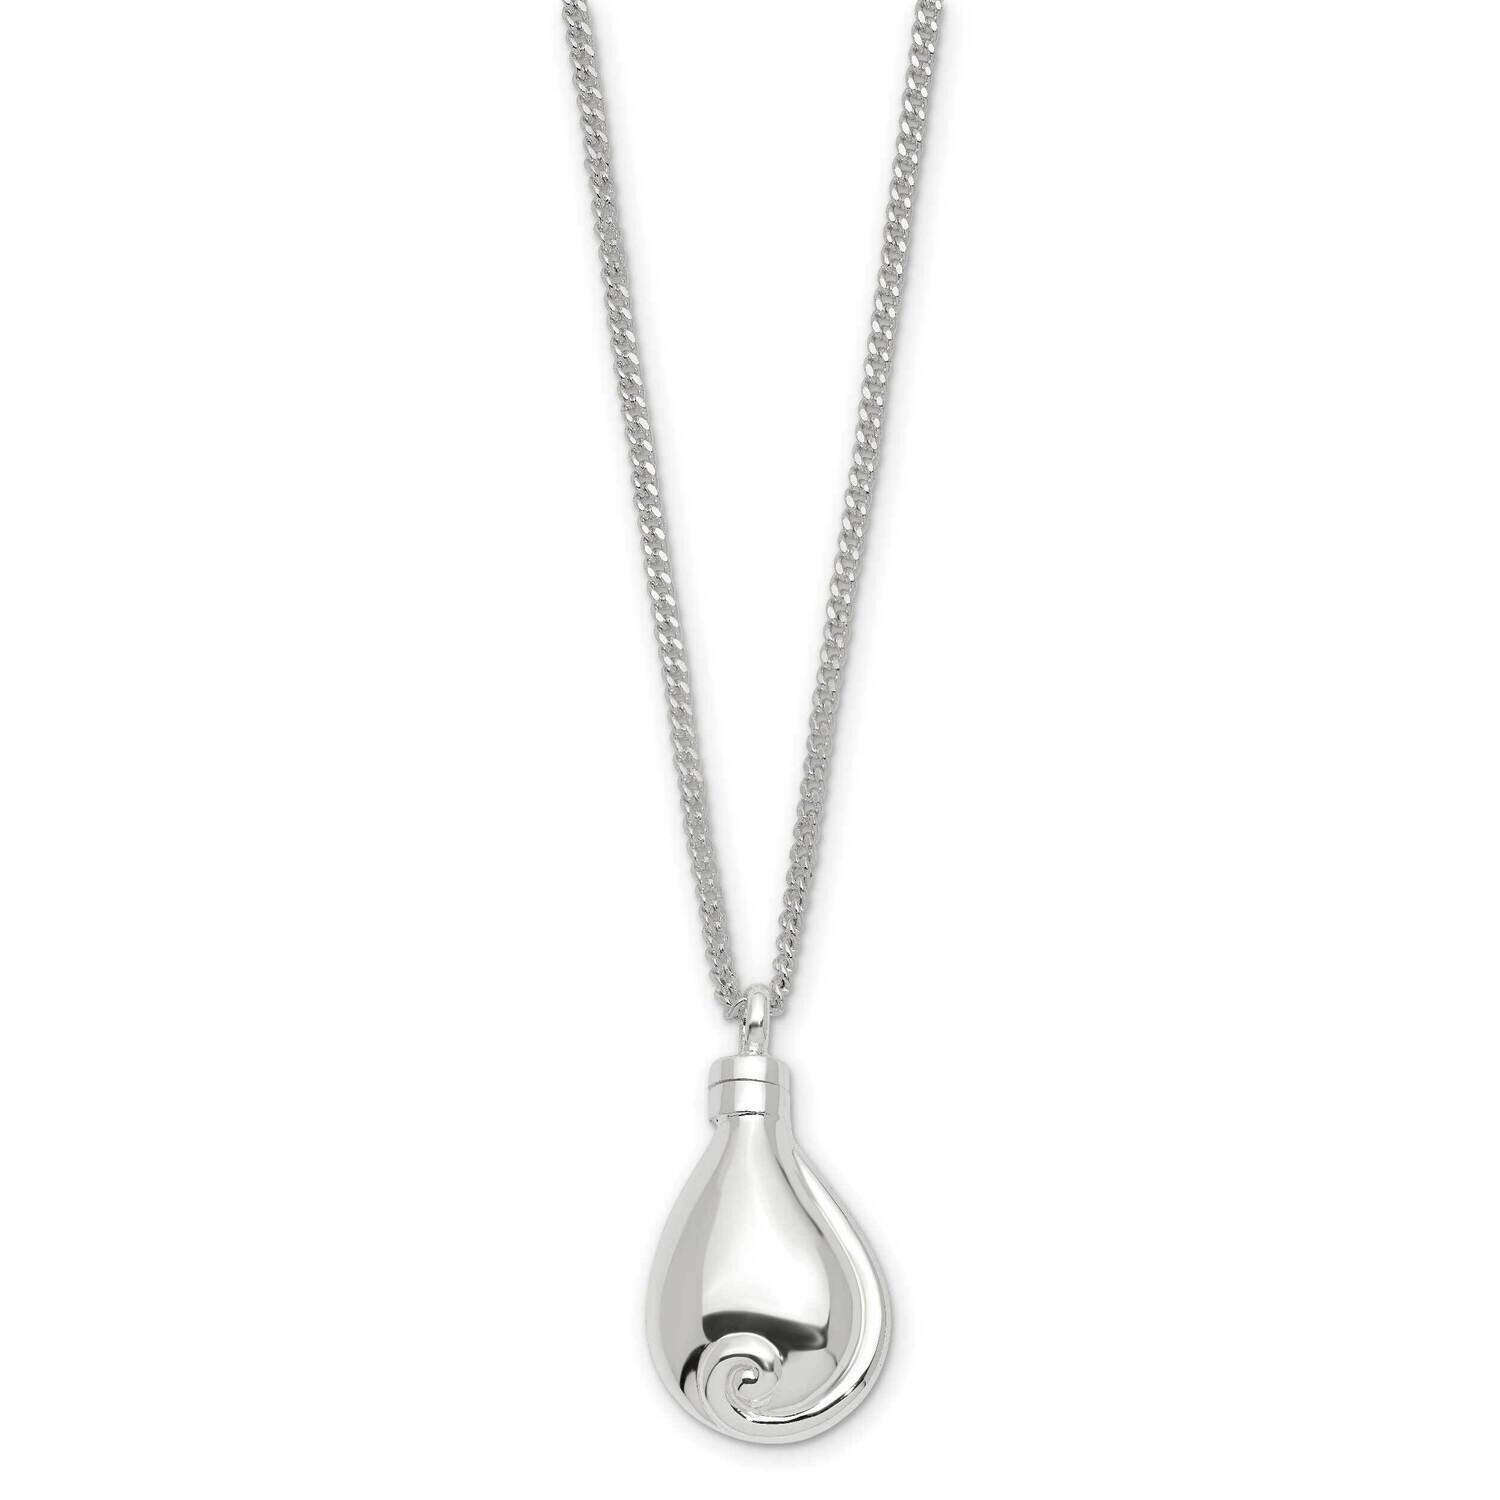 No Tears In Heaven Memorial Urn Ash Holder 23.5 Inch Necklace Silver-plated GM18996